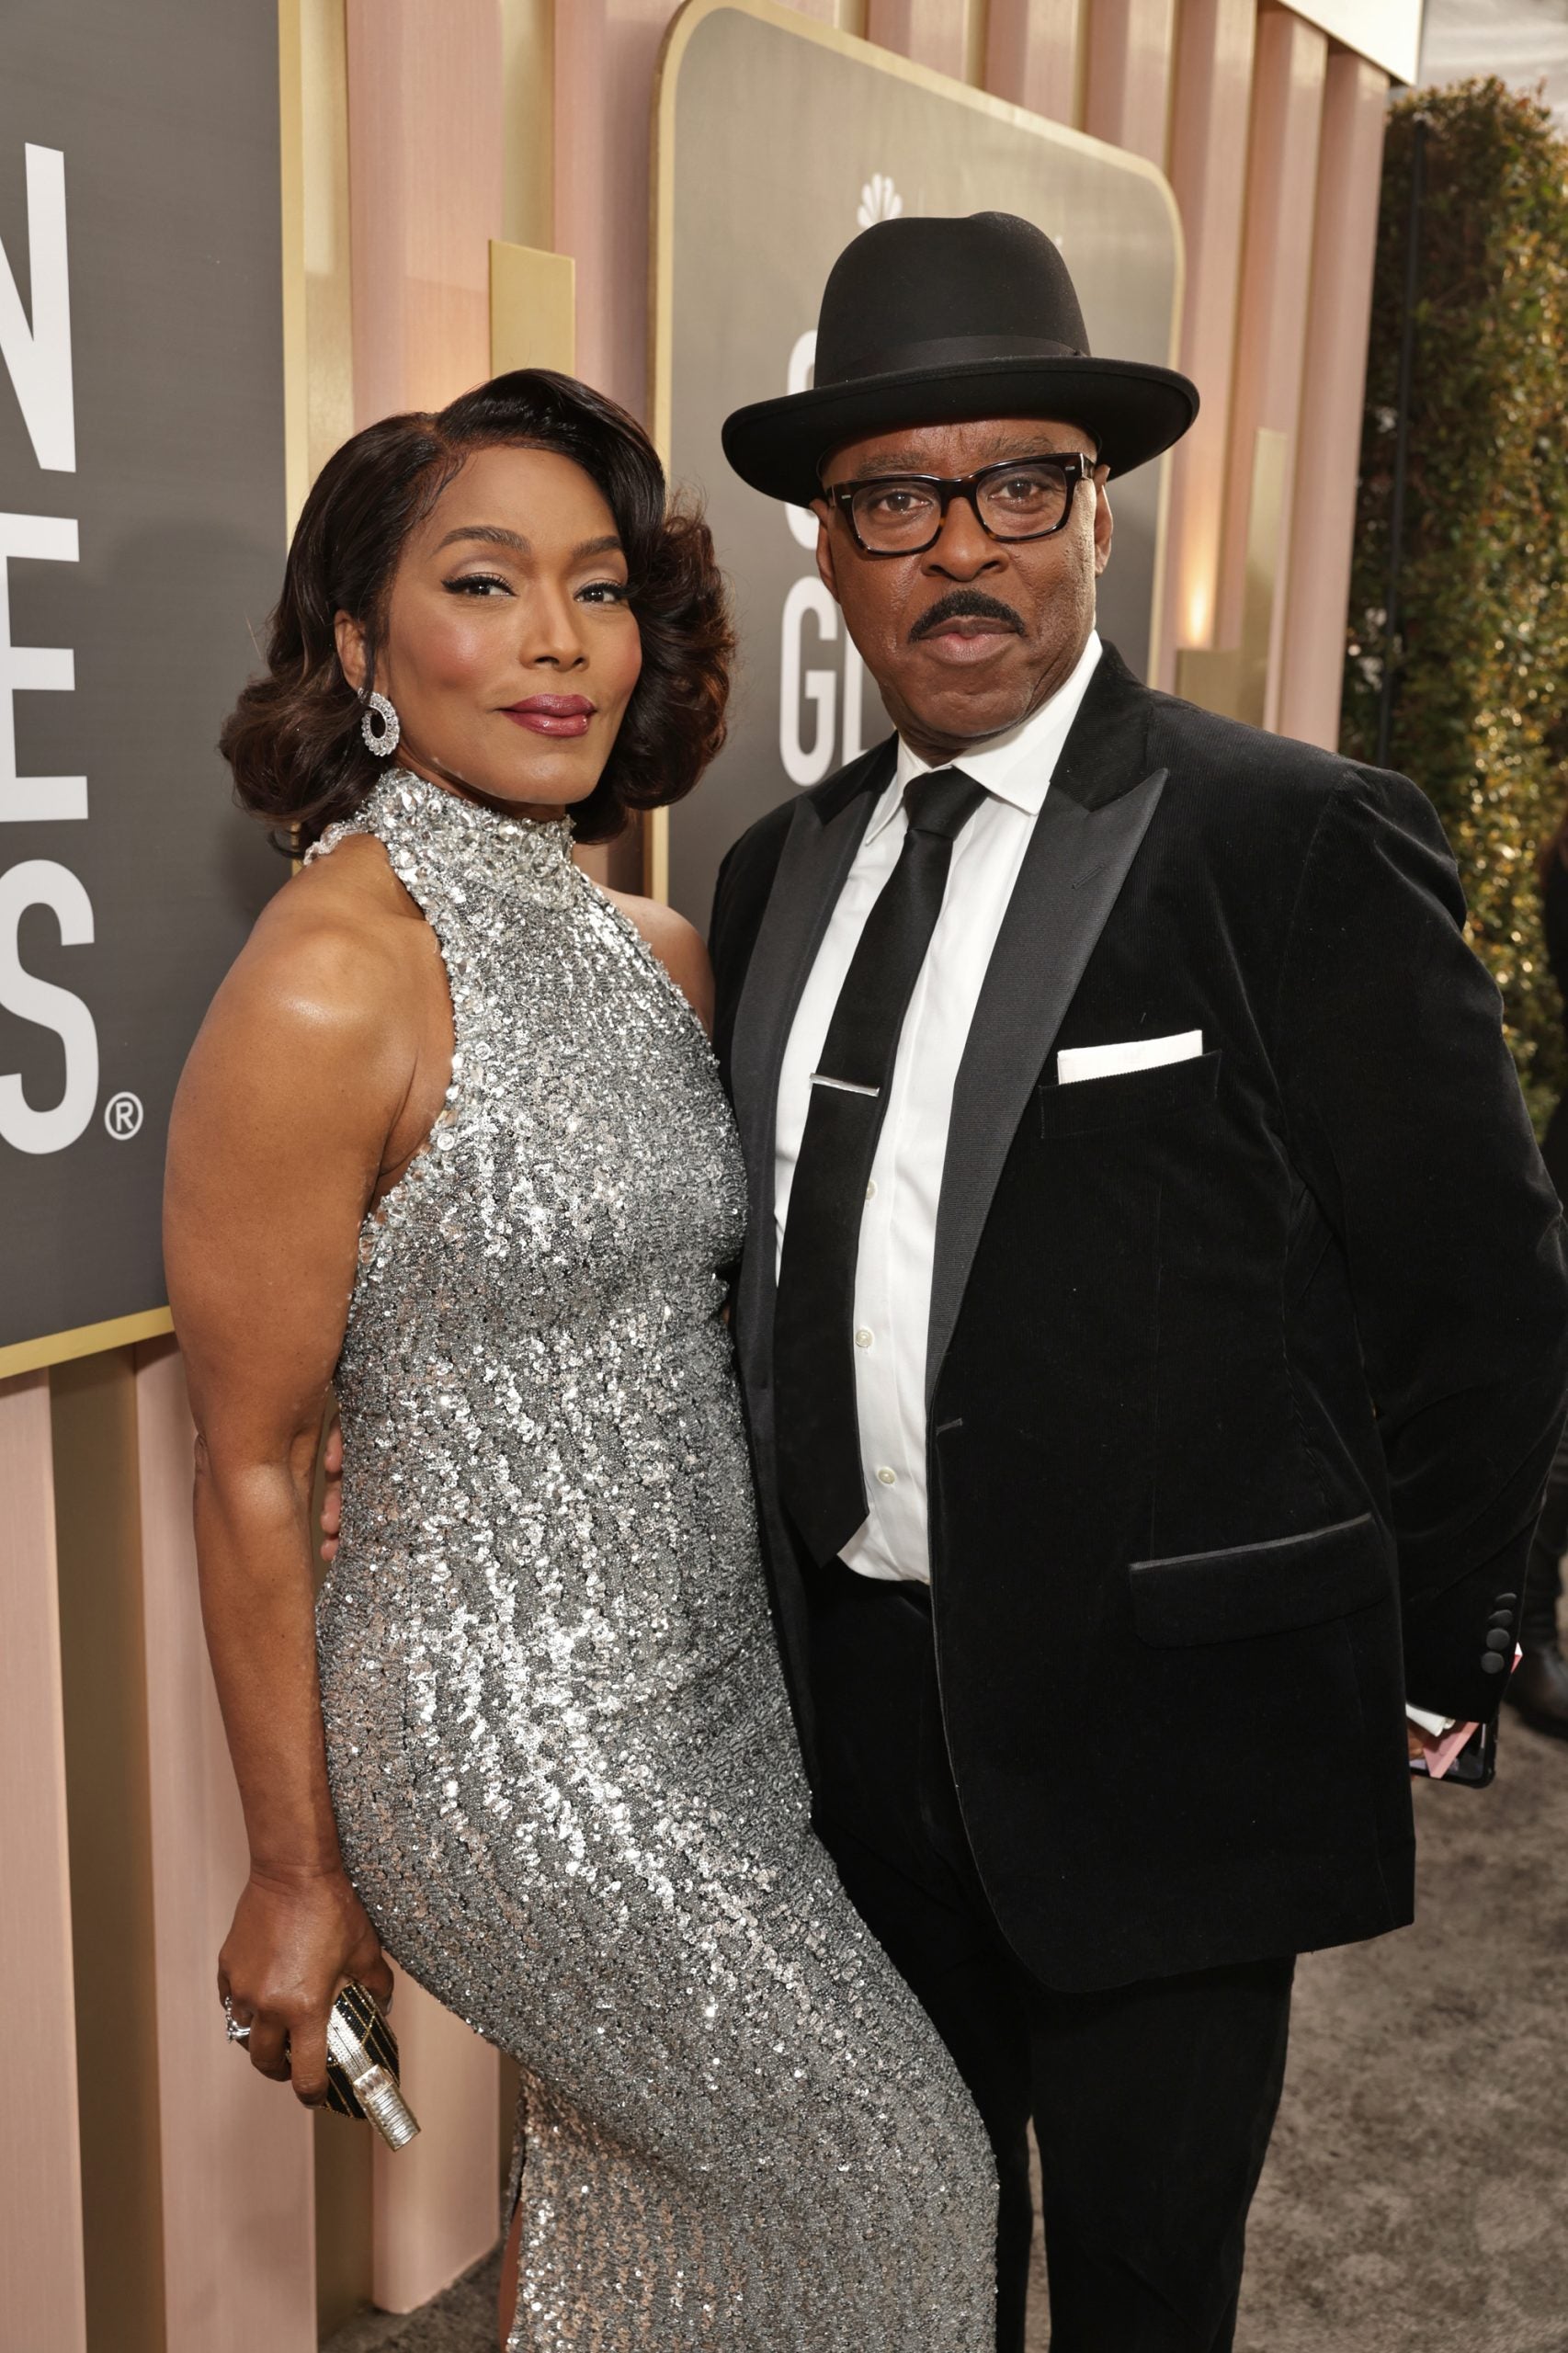 Star Gazing: The Hottest Celebrity Couples At The Golden Globes